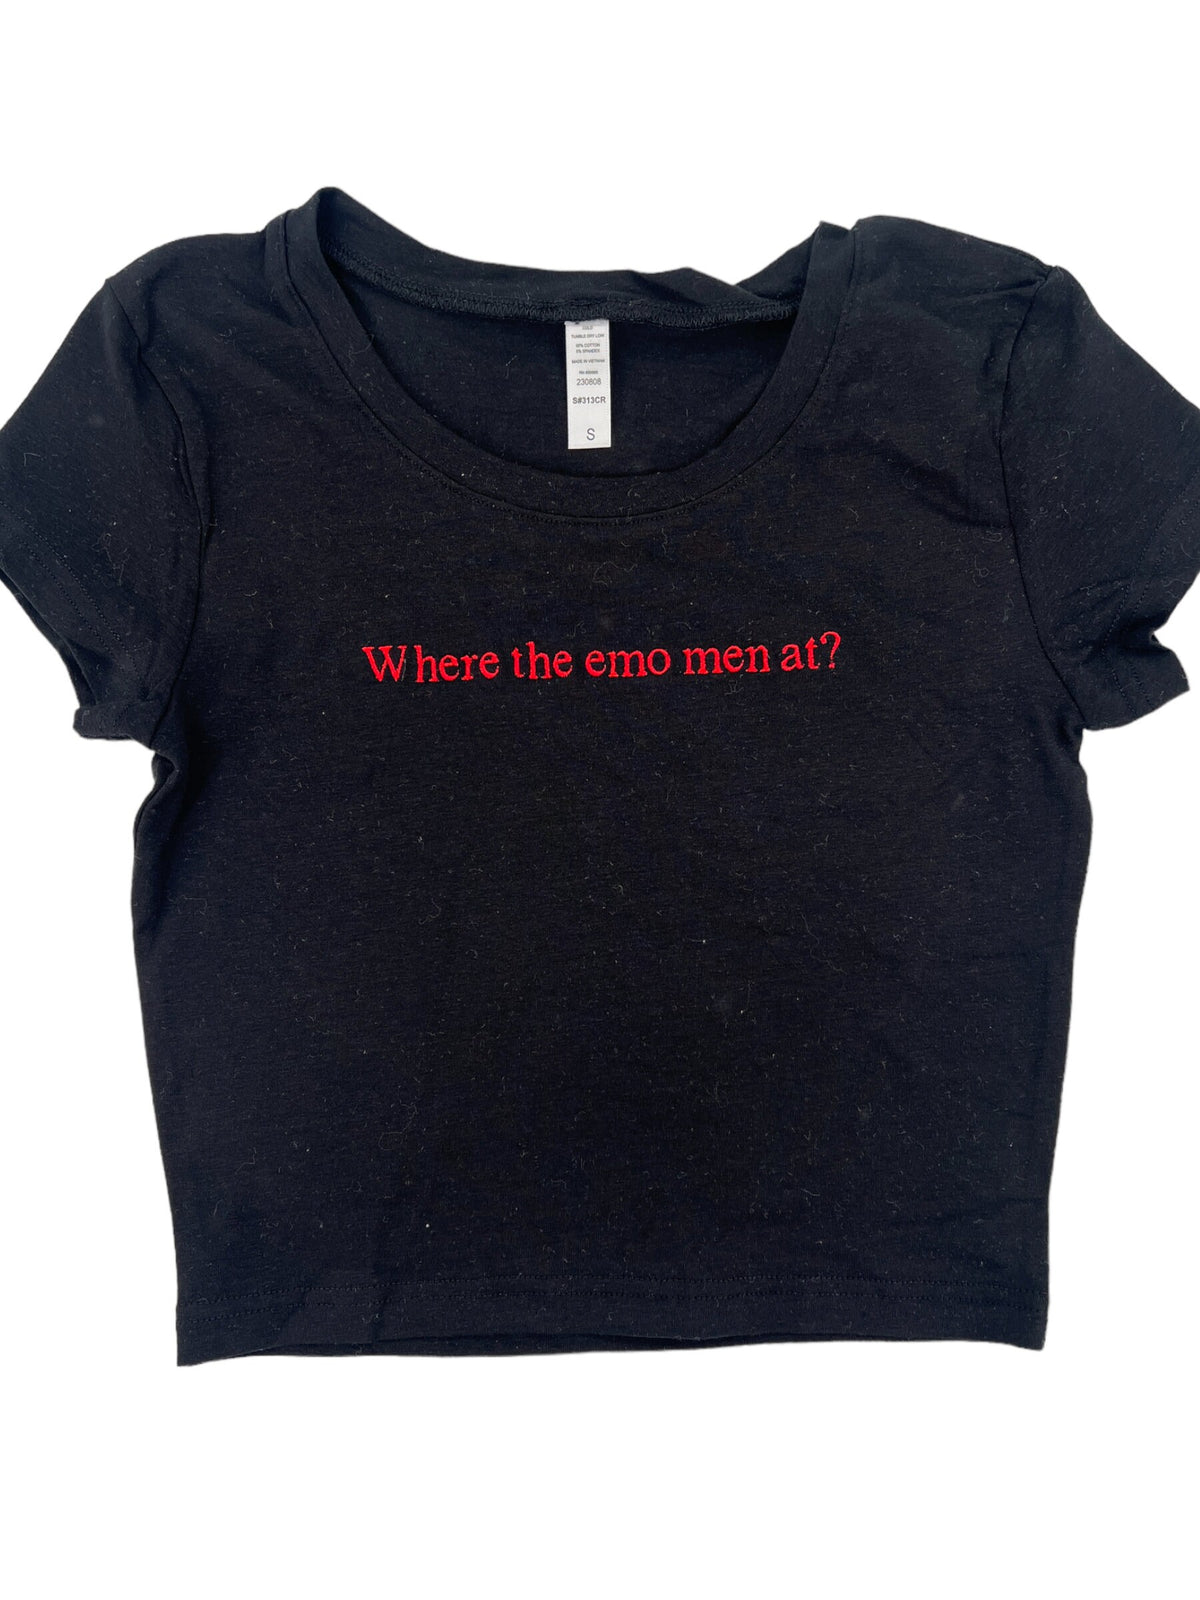 a black t - shirt with red writing that says where the emo men are